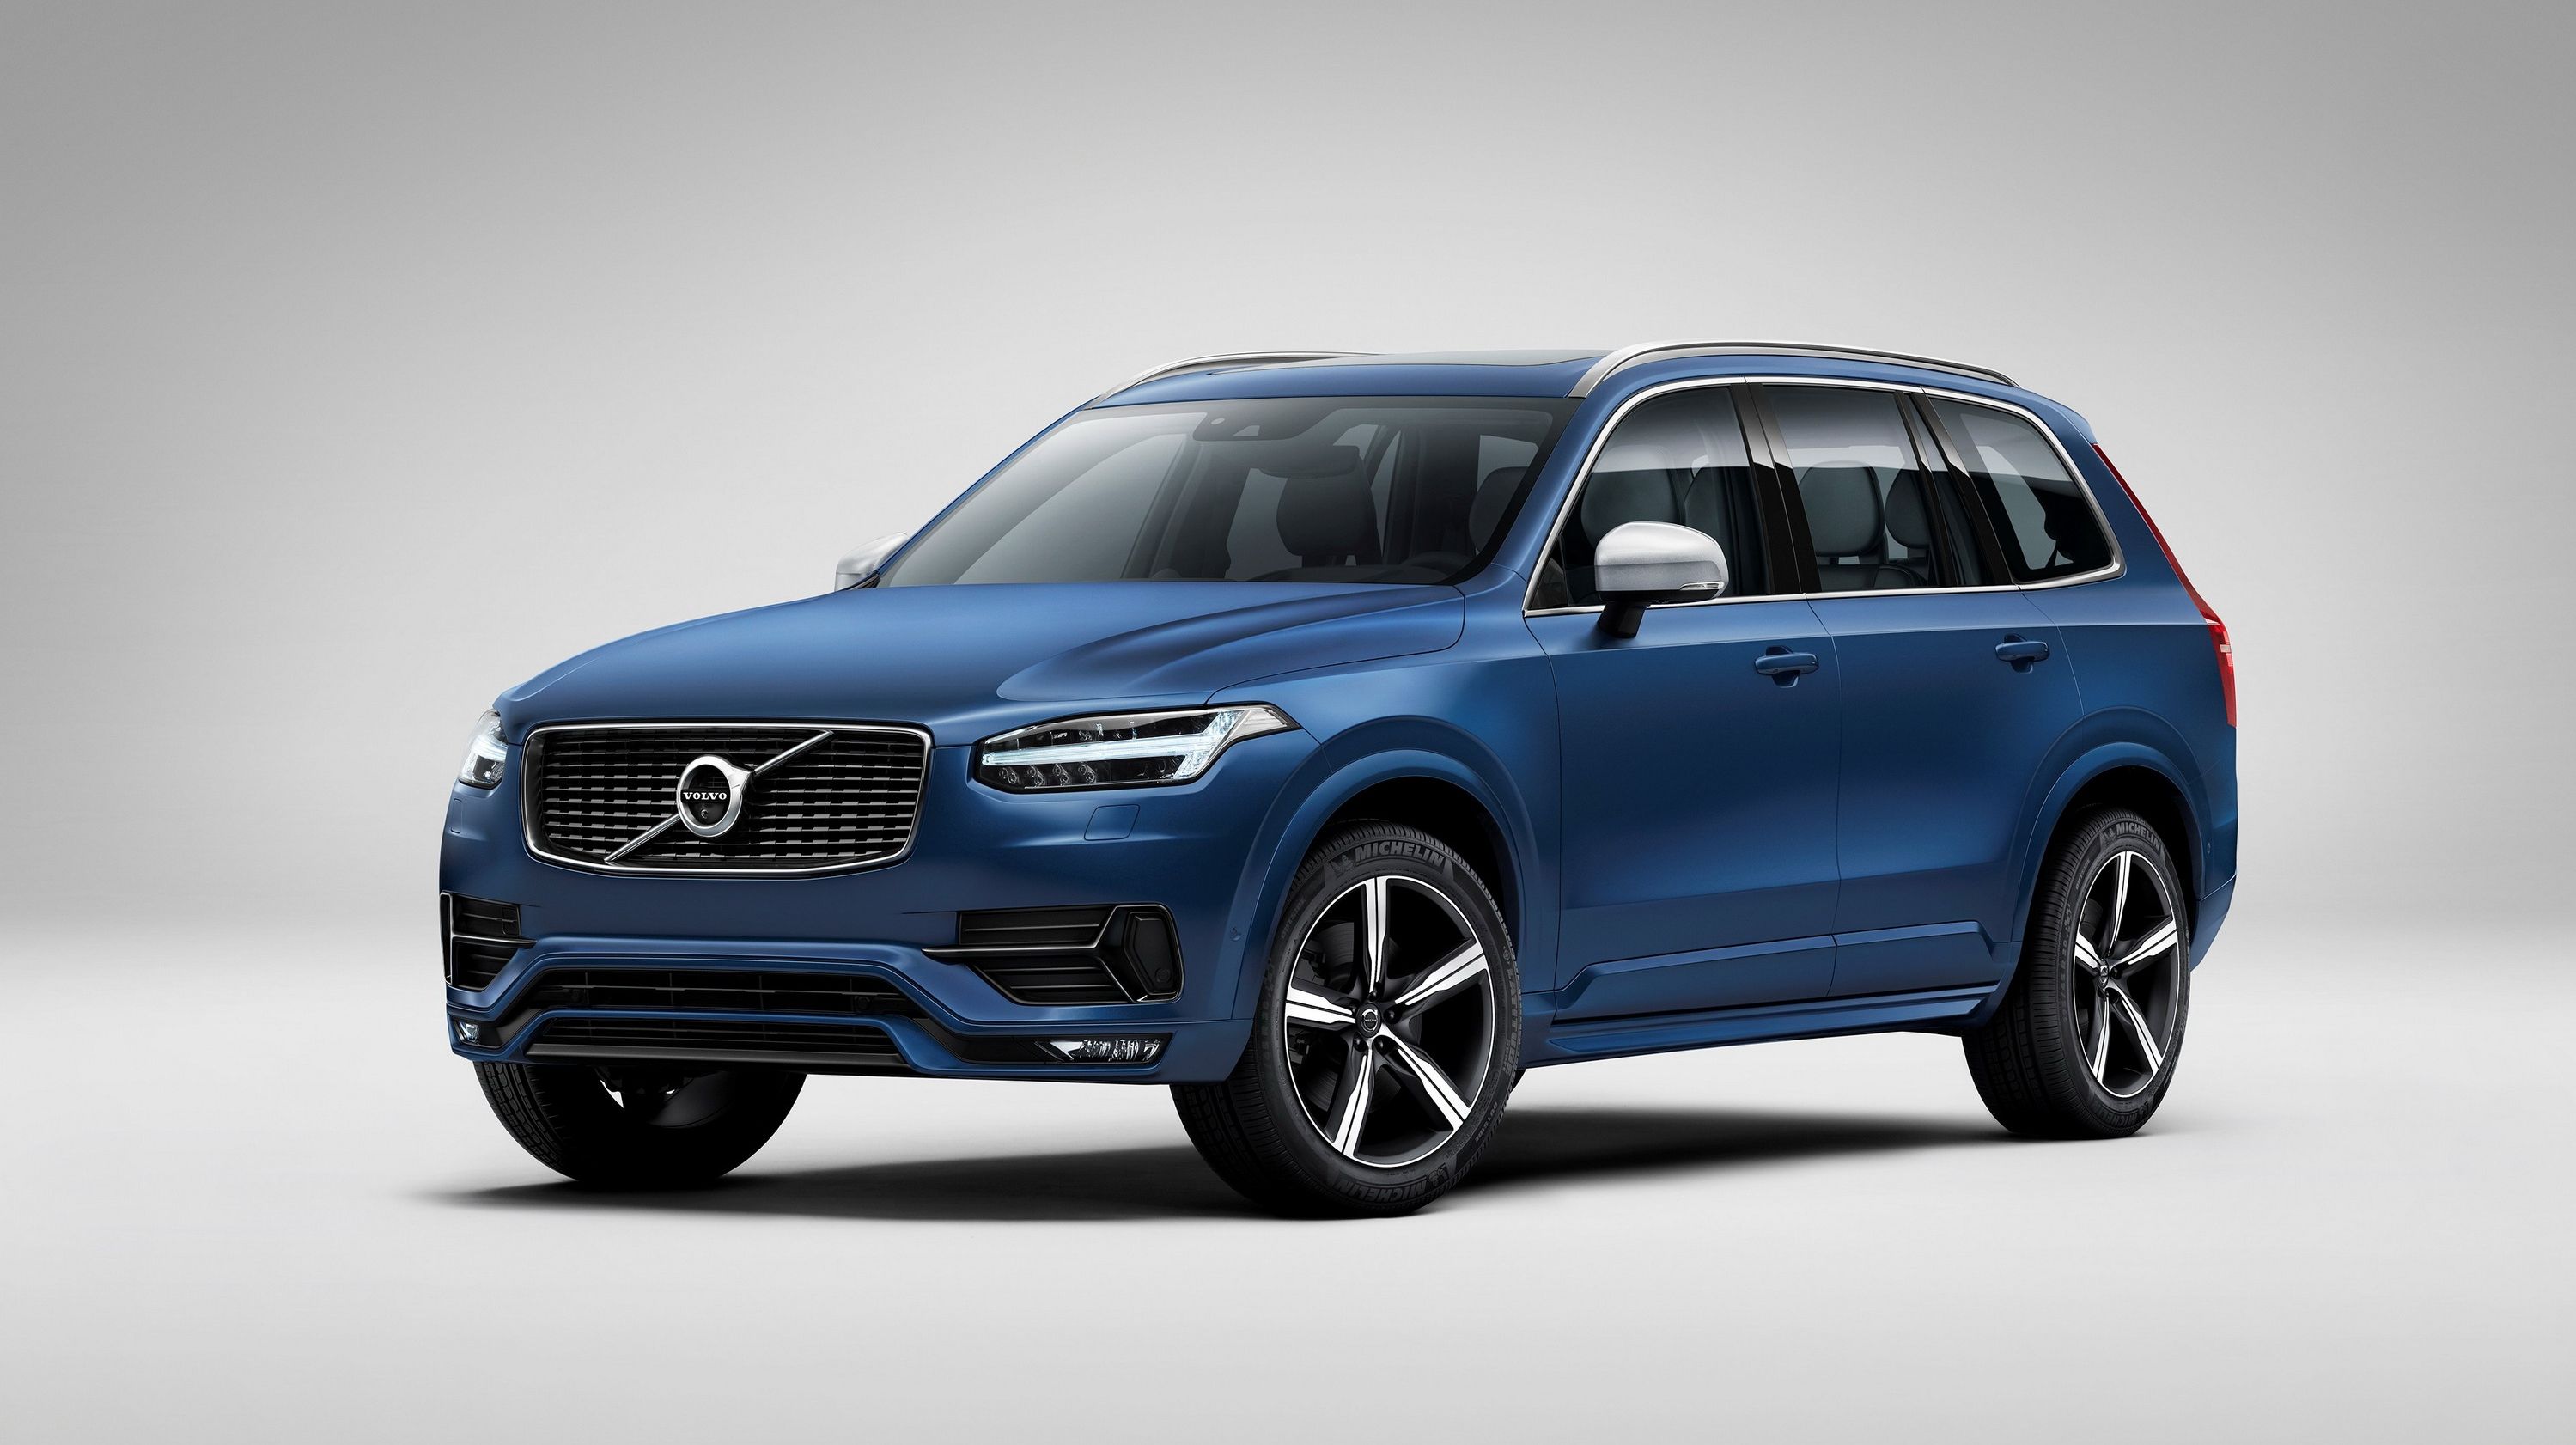  It's not even in dealerships yet, and Volvo is already improving upon the new XC90.